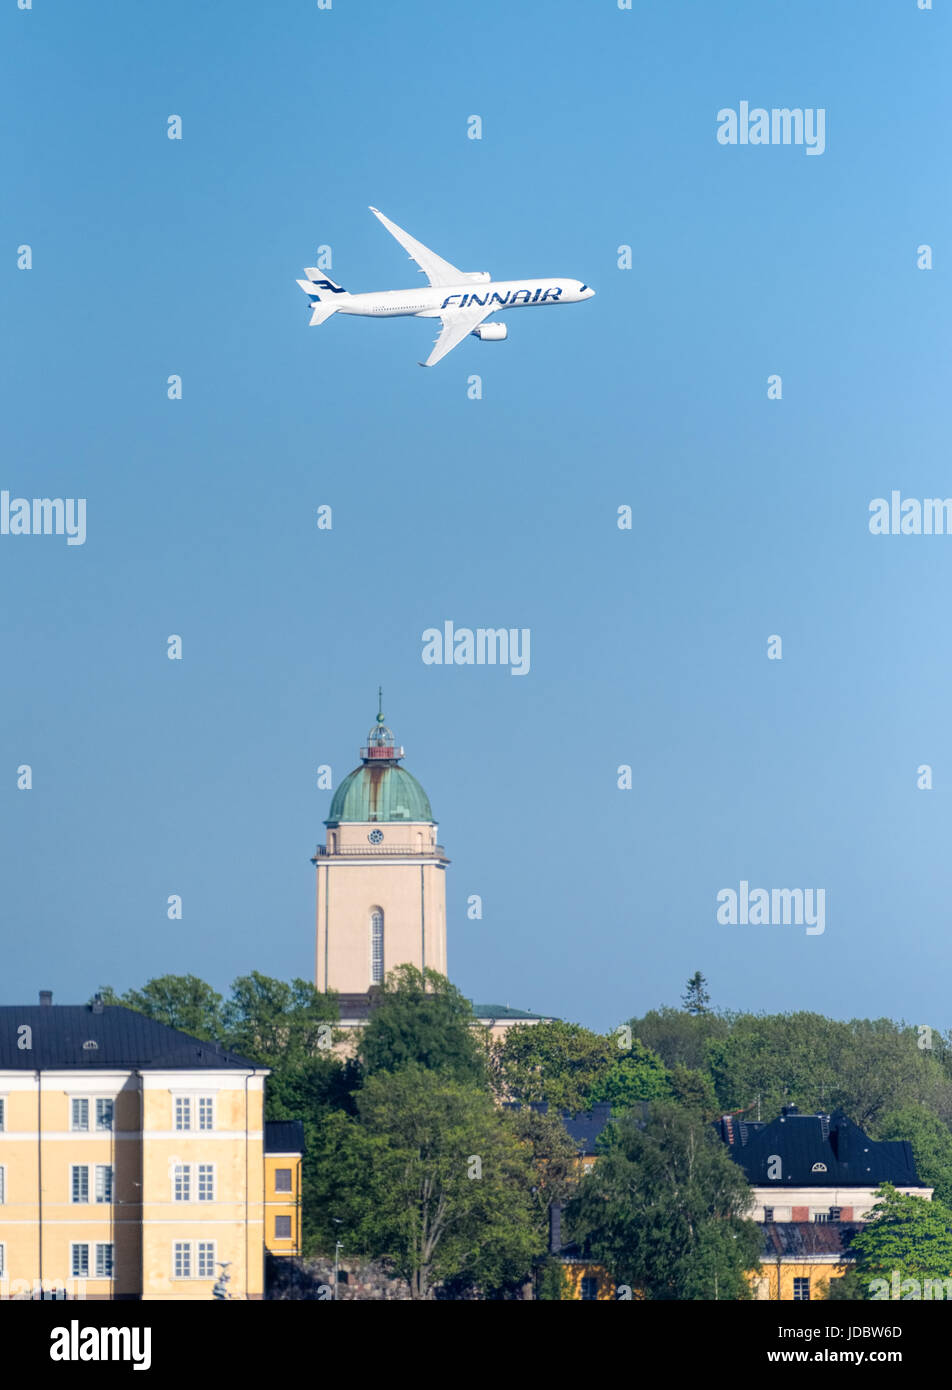 Helsinki, Finland - 9 June 2017: Finnair Airbus A350 XWB airliner flying in extremely low altitude over Suomenlinna fortress island at the Kaivopuisto Stock Photo